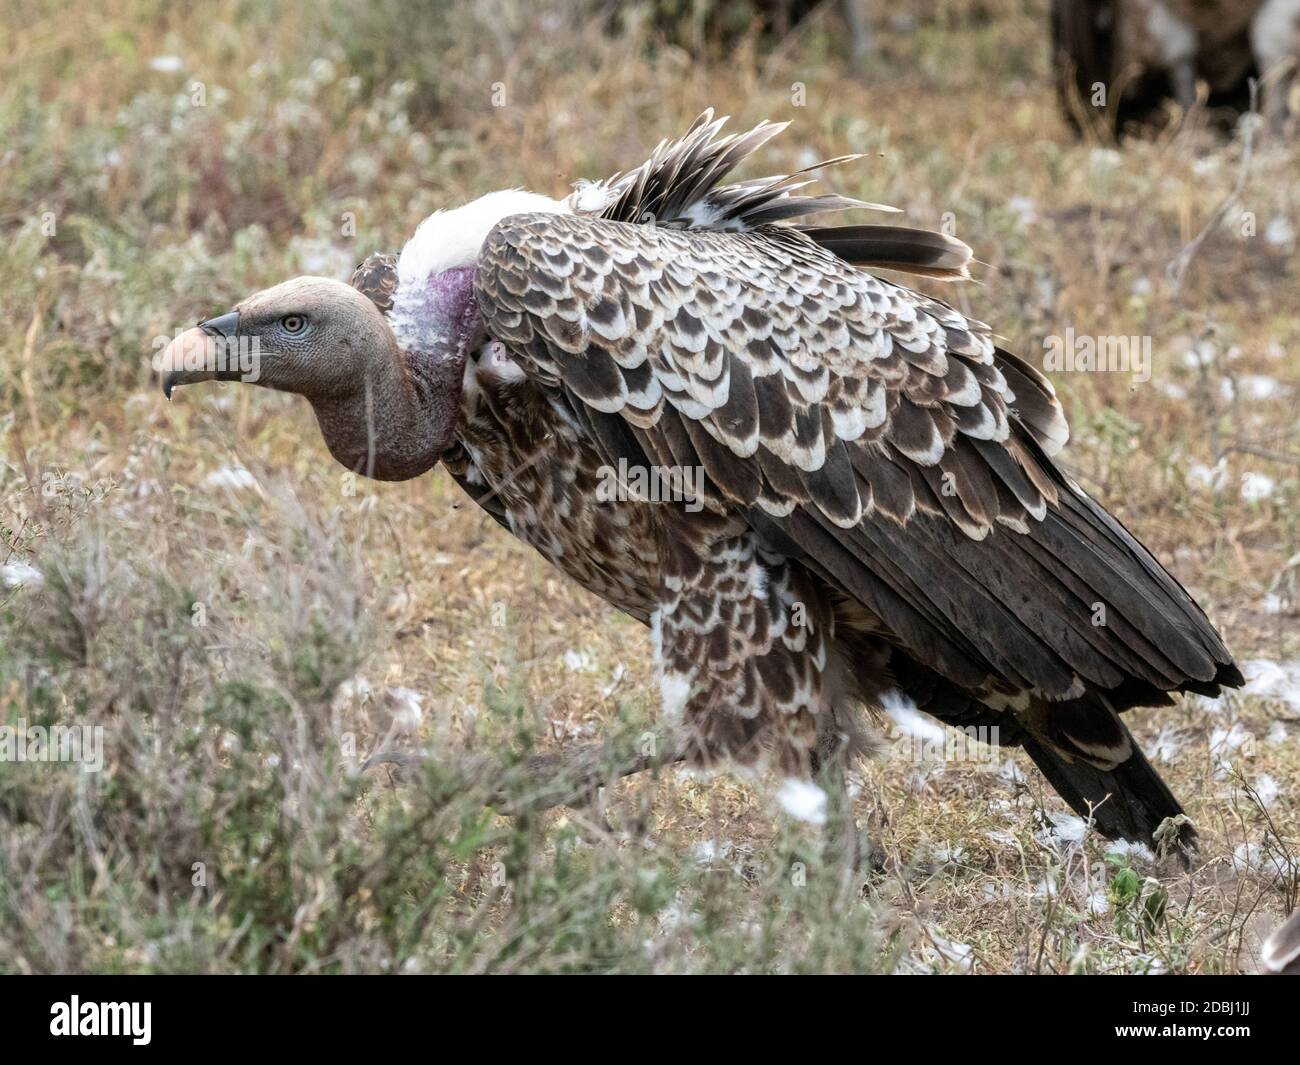 Ruppell's vultures (Gyps rueppelli), on the carcass of a plains zebra in Serengeti National Park, Tanzania, East Africa, Africa Stock Photo